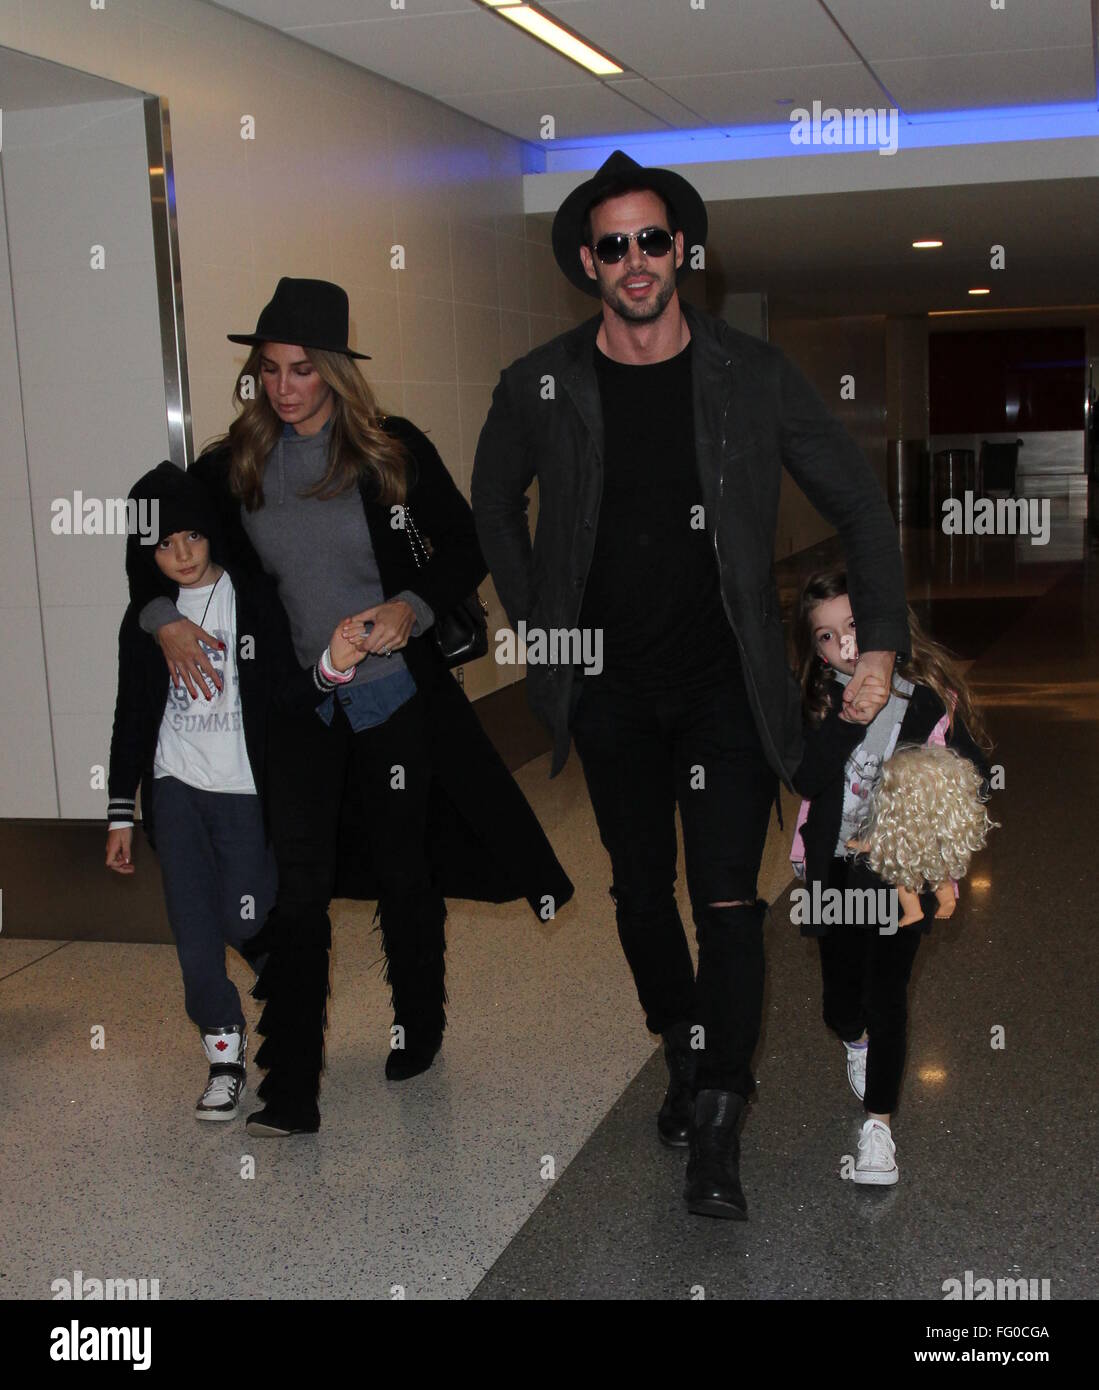 William Levy arrives at Los Angeles International Airport (LAX) with Elizabeth  Gutierrez and their children, Christopher and Kailey Featuring: William Levy,  Elizabeth Gutiérrez, Christopher Alexander Levy, Kailey Alexandra Levy  Where: Los Angeles,